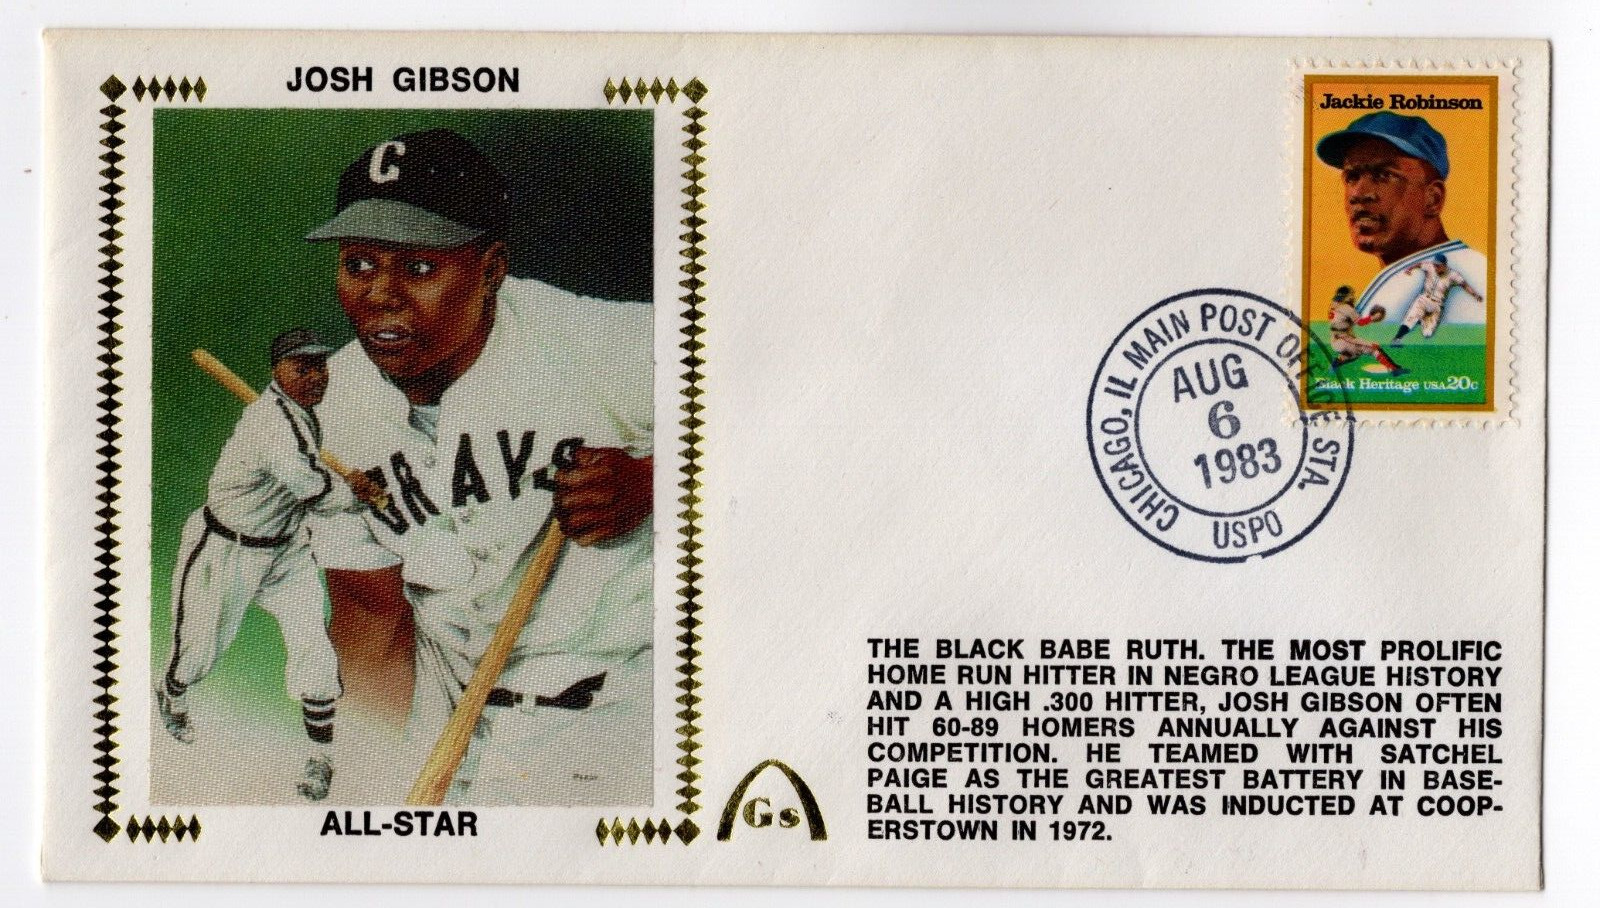 Josh Gibson All-Star Gateway Silk First Day Cover Aug 6, 1983 - Jackie Robinson